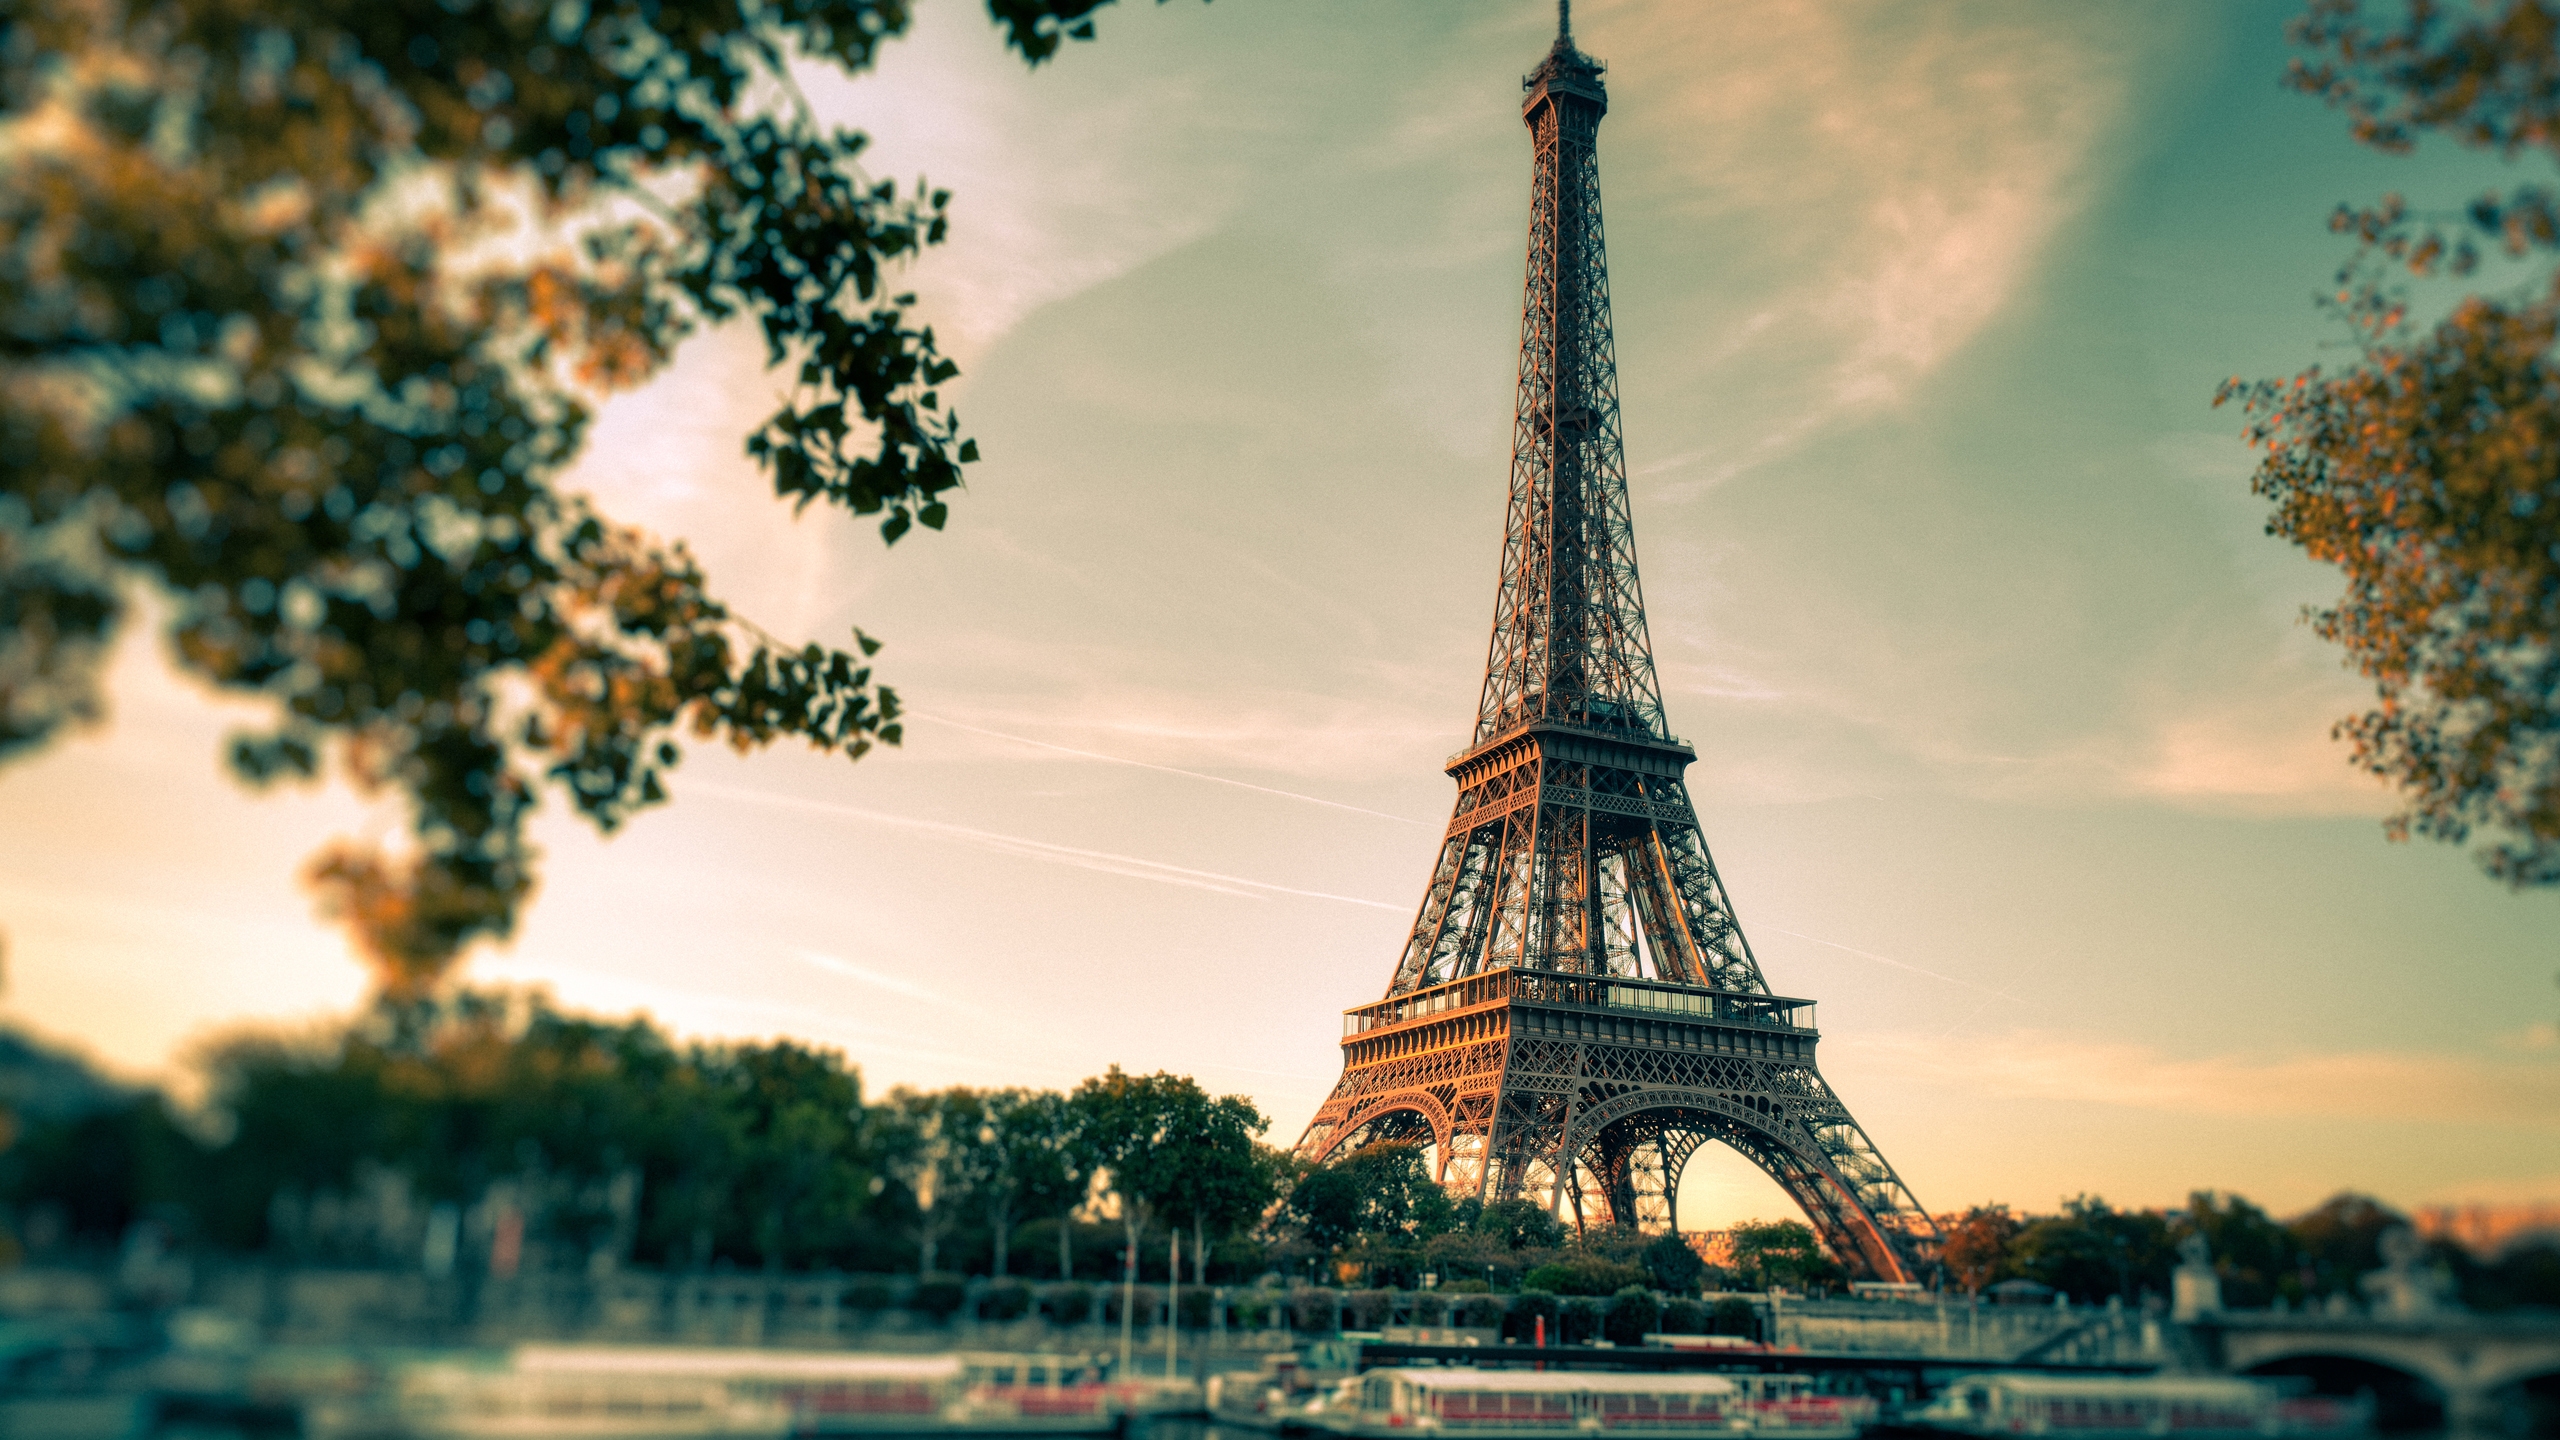 Lovely Eiffel Tower View for 2560x1440 HDTV resolution